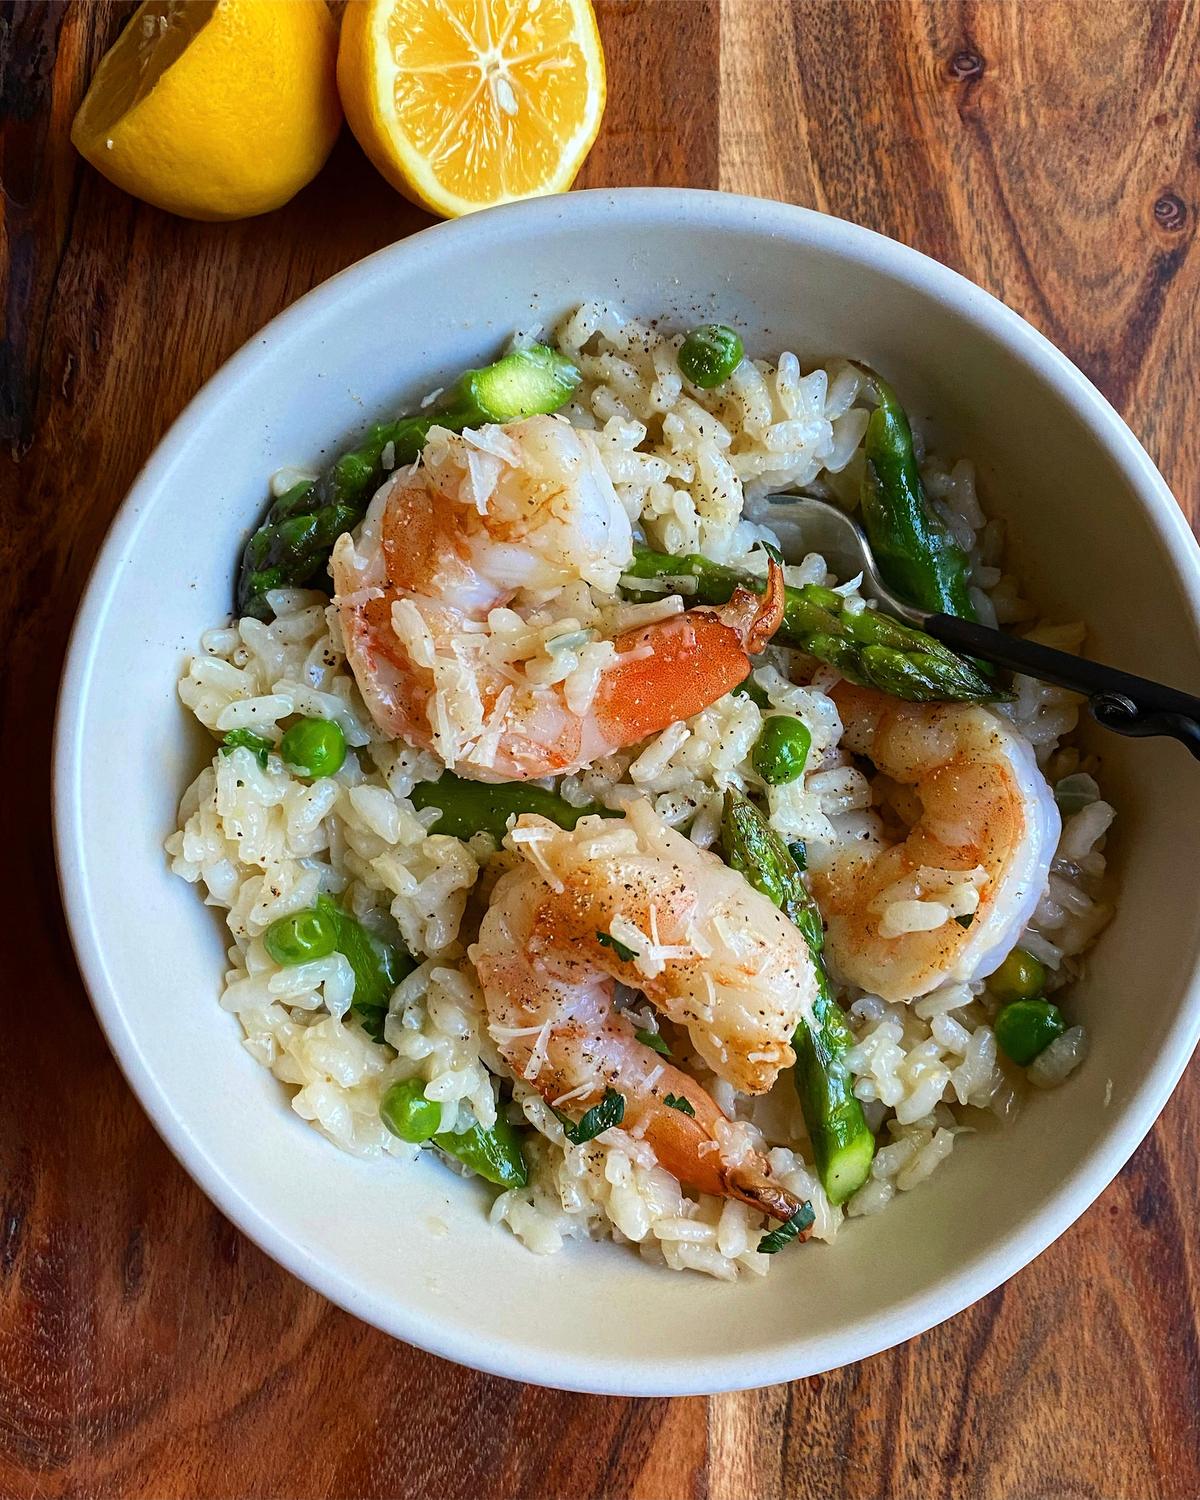  This risotto takes inspiration from pasta primavera, with fresh asparagus and peas studding the rice, along with sweet briny shrimp and juicy Meyer lemon. (Lynda Balslev for Tastefood)